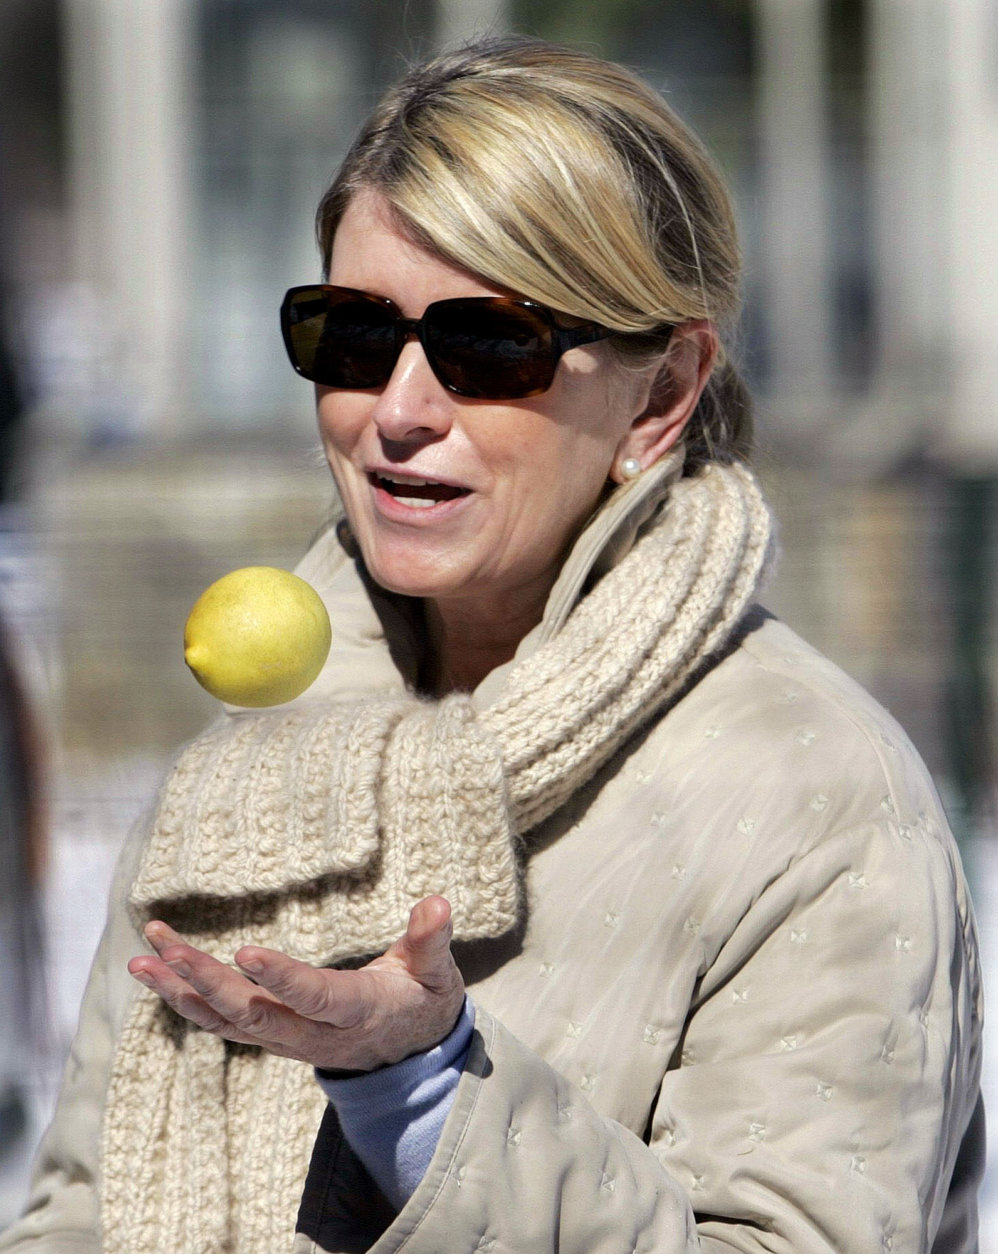 Martha Stewart tosses a lemon into the air outside of her home in Katonah, N. Y., Friday, March 4, 2005. Stewart refered to the saying about turning lemons into lemonade and said she was going inside to make hot lemonade. Stewart must spend the next five months in home confinement here at her $16 million New York estate.  (AP Photo/Ed Betz)